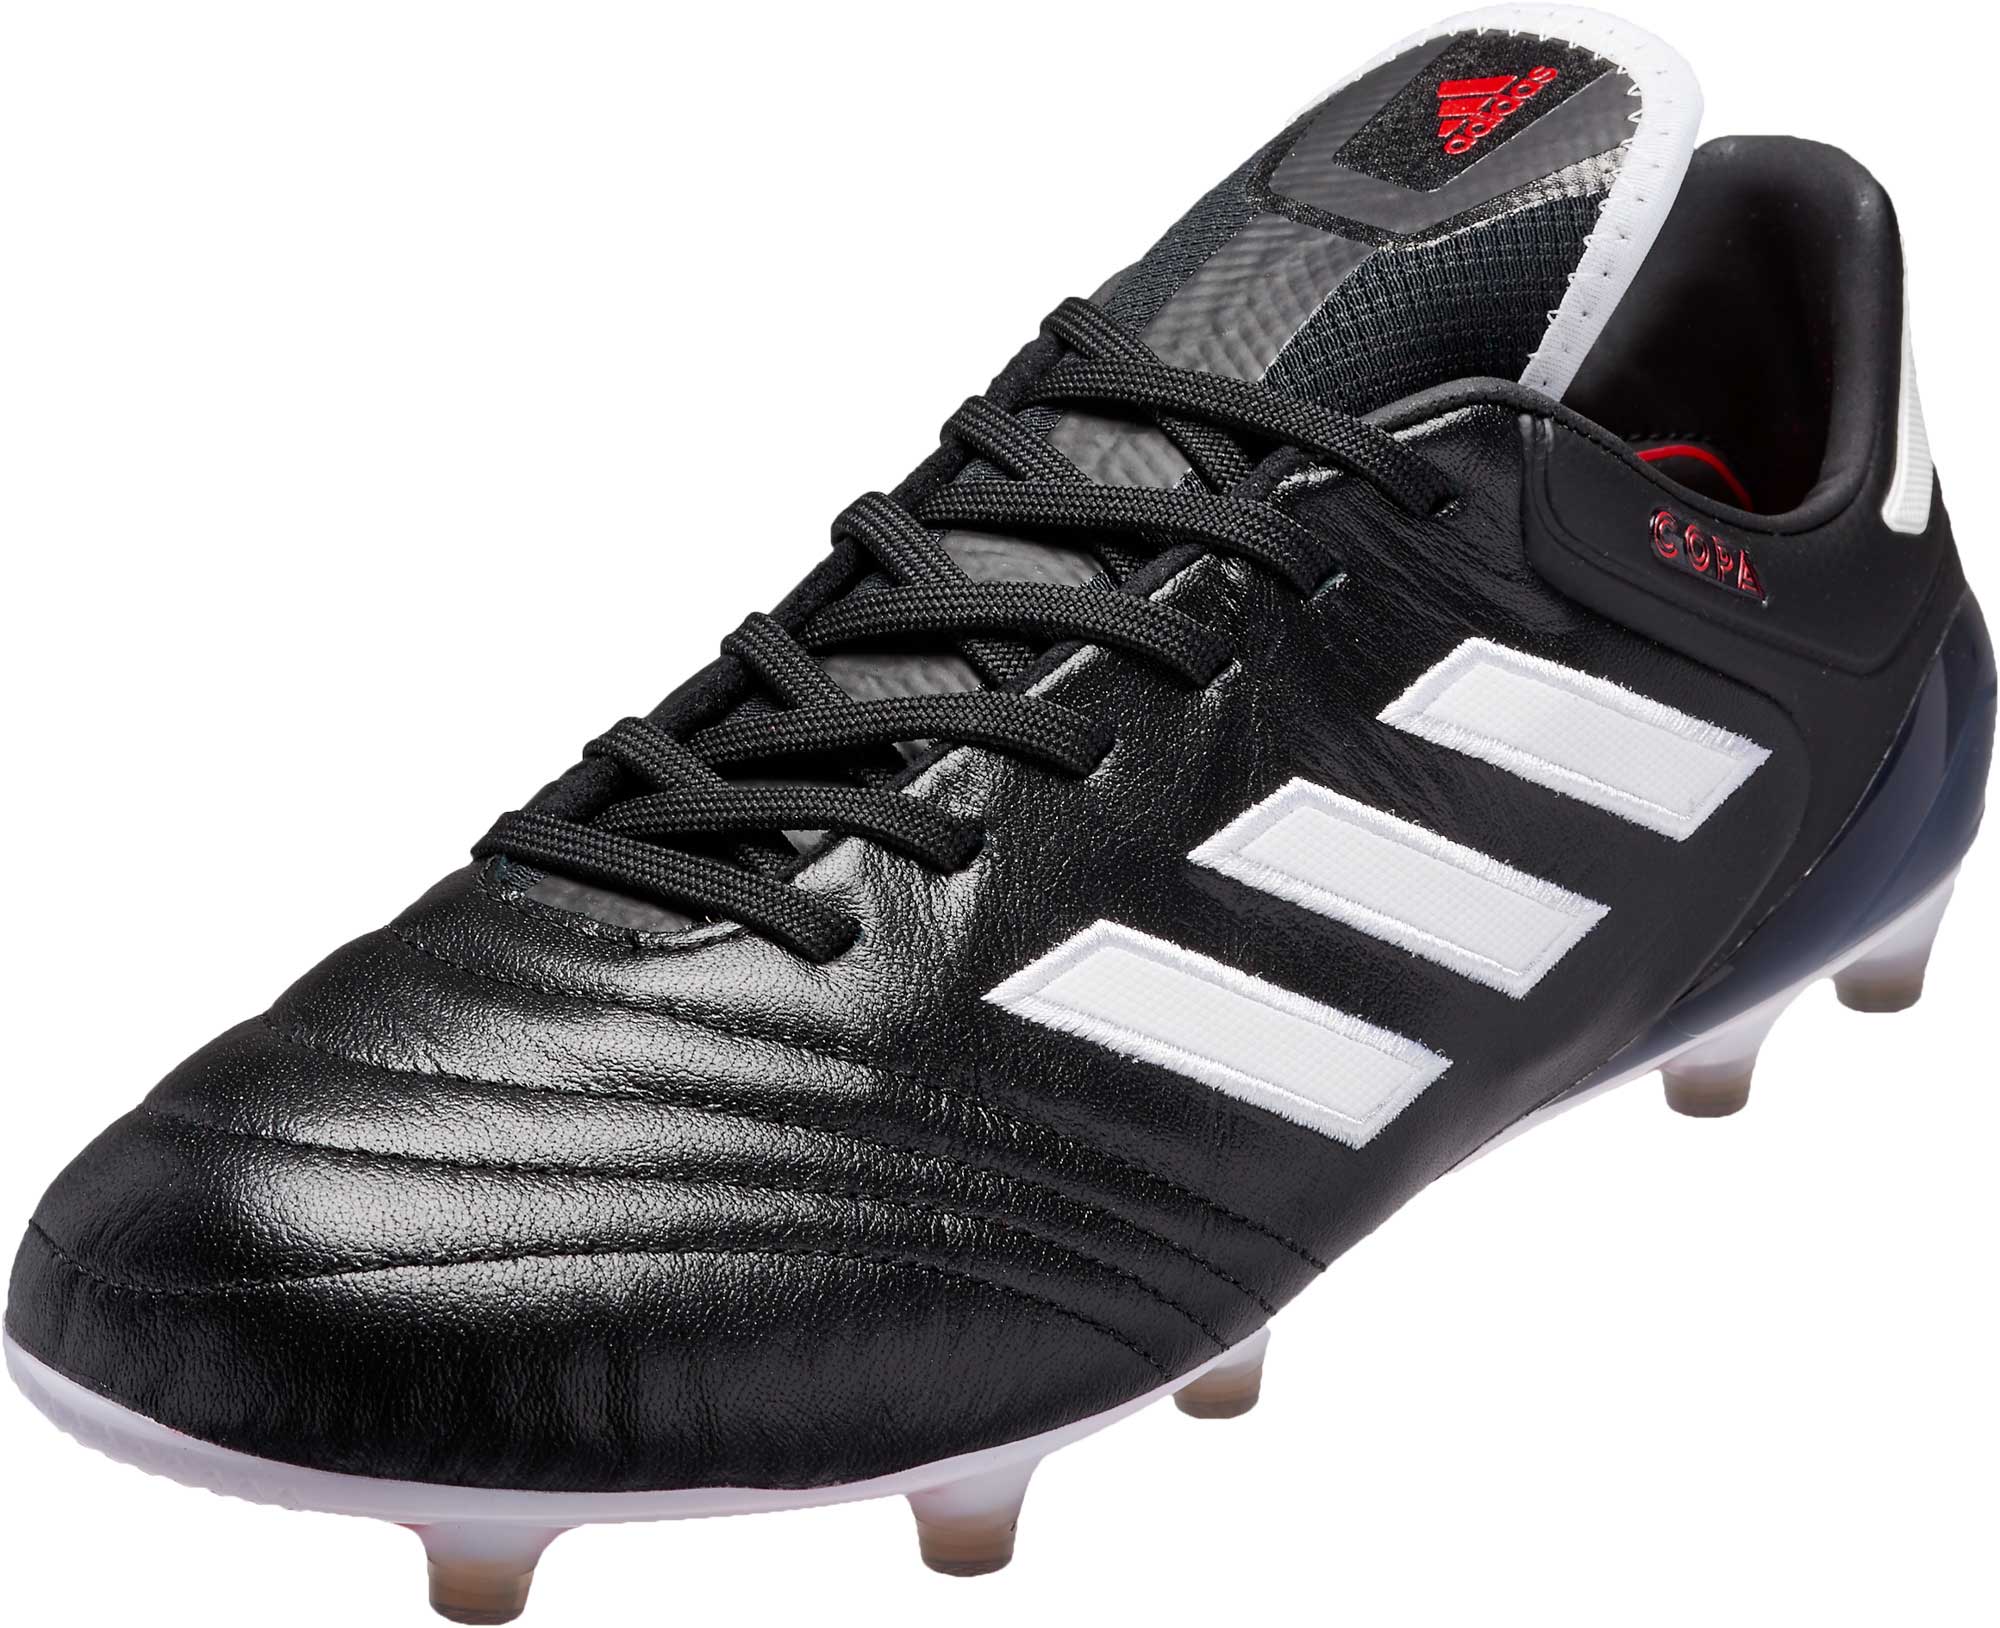 Black Red adidas Copa 17.1 FG Soccer Shoes - adidas Soccer Shoes